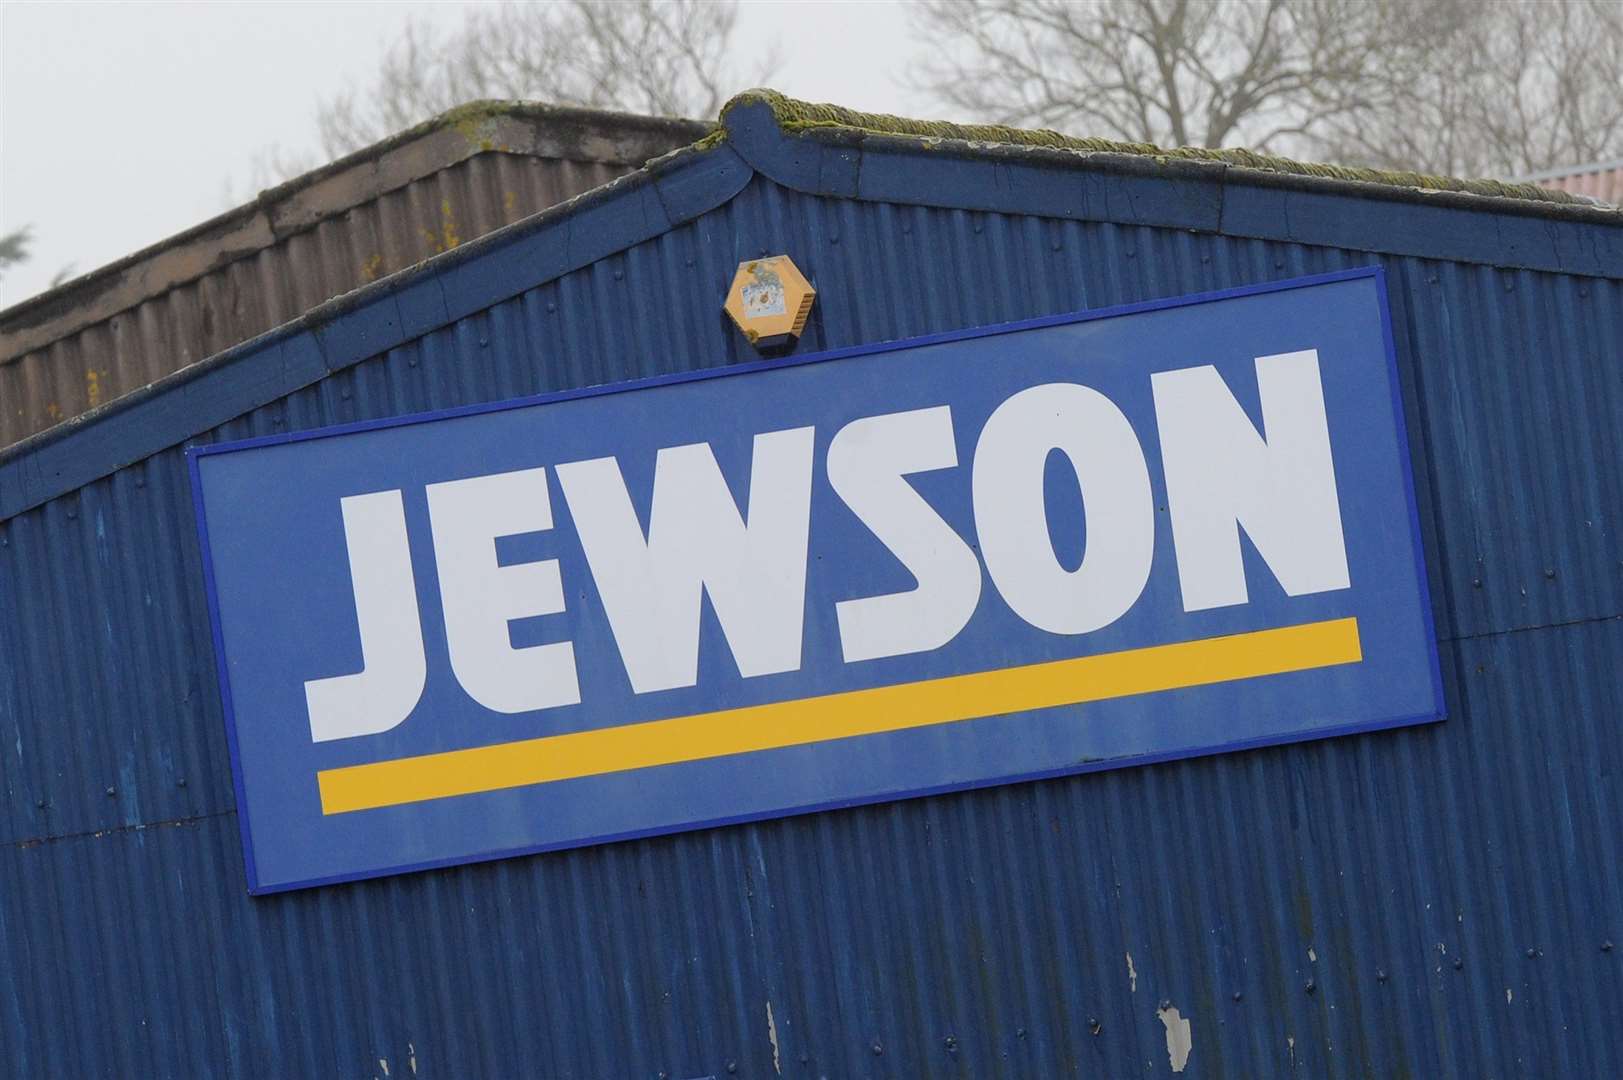 Jewson is one of the UK's leading builders' merchants